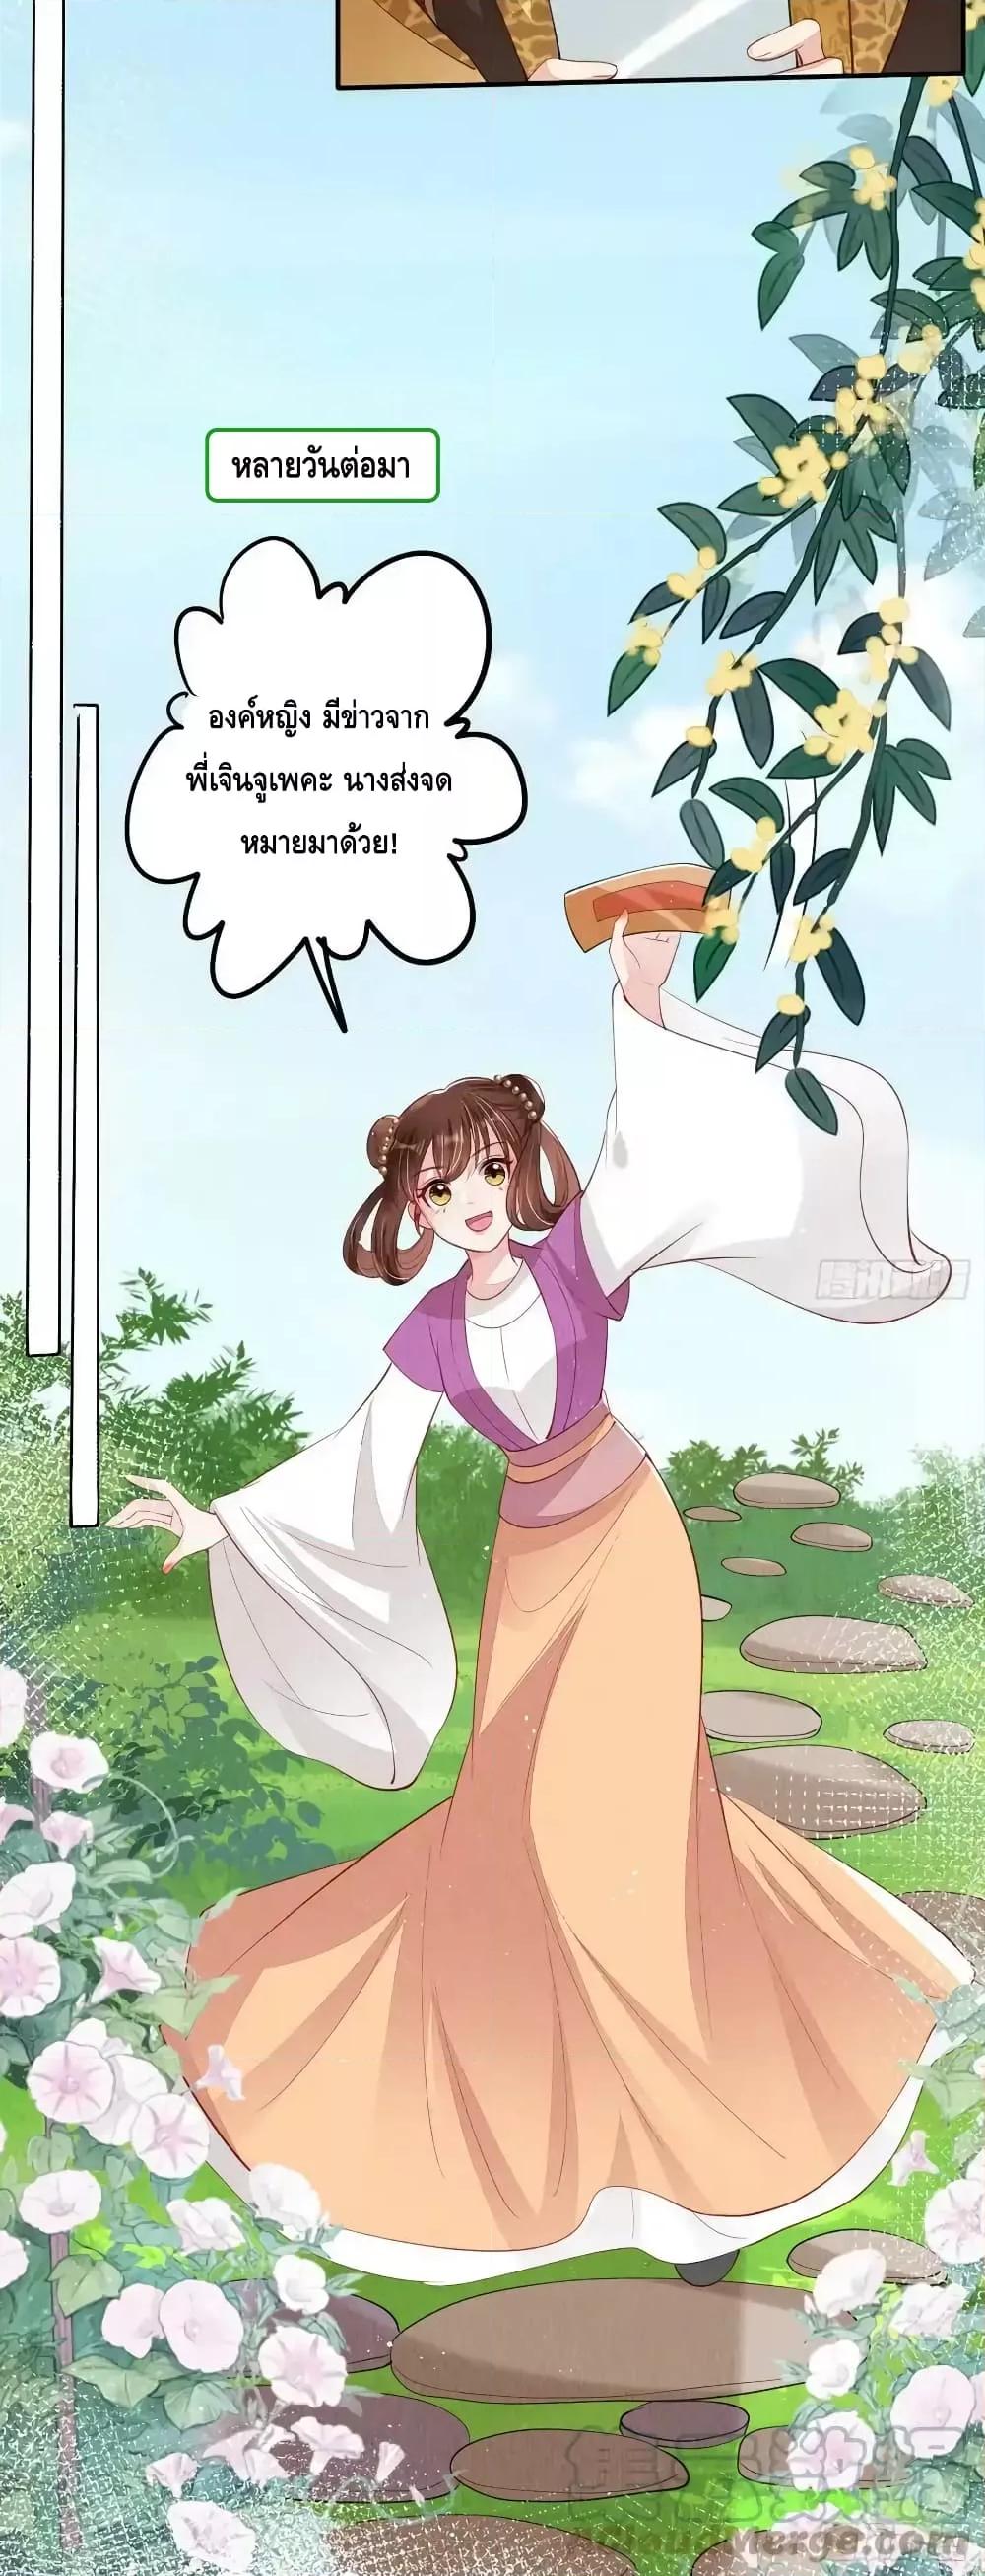 After I Bloom, a Hundred Flowers Will ill – ดอกไม้นับ ตอนที่ 70 (15)